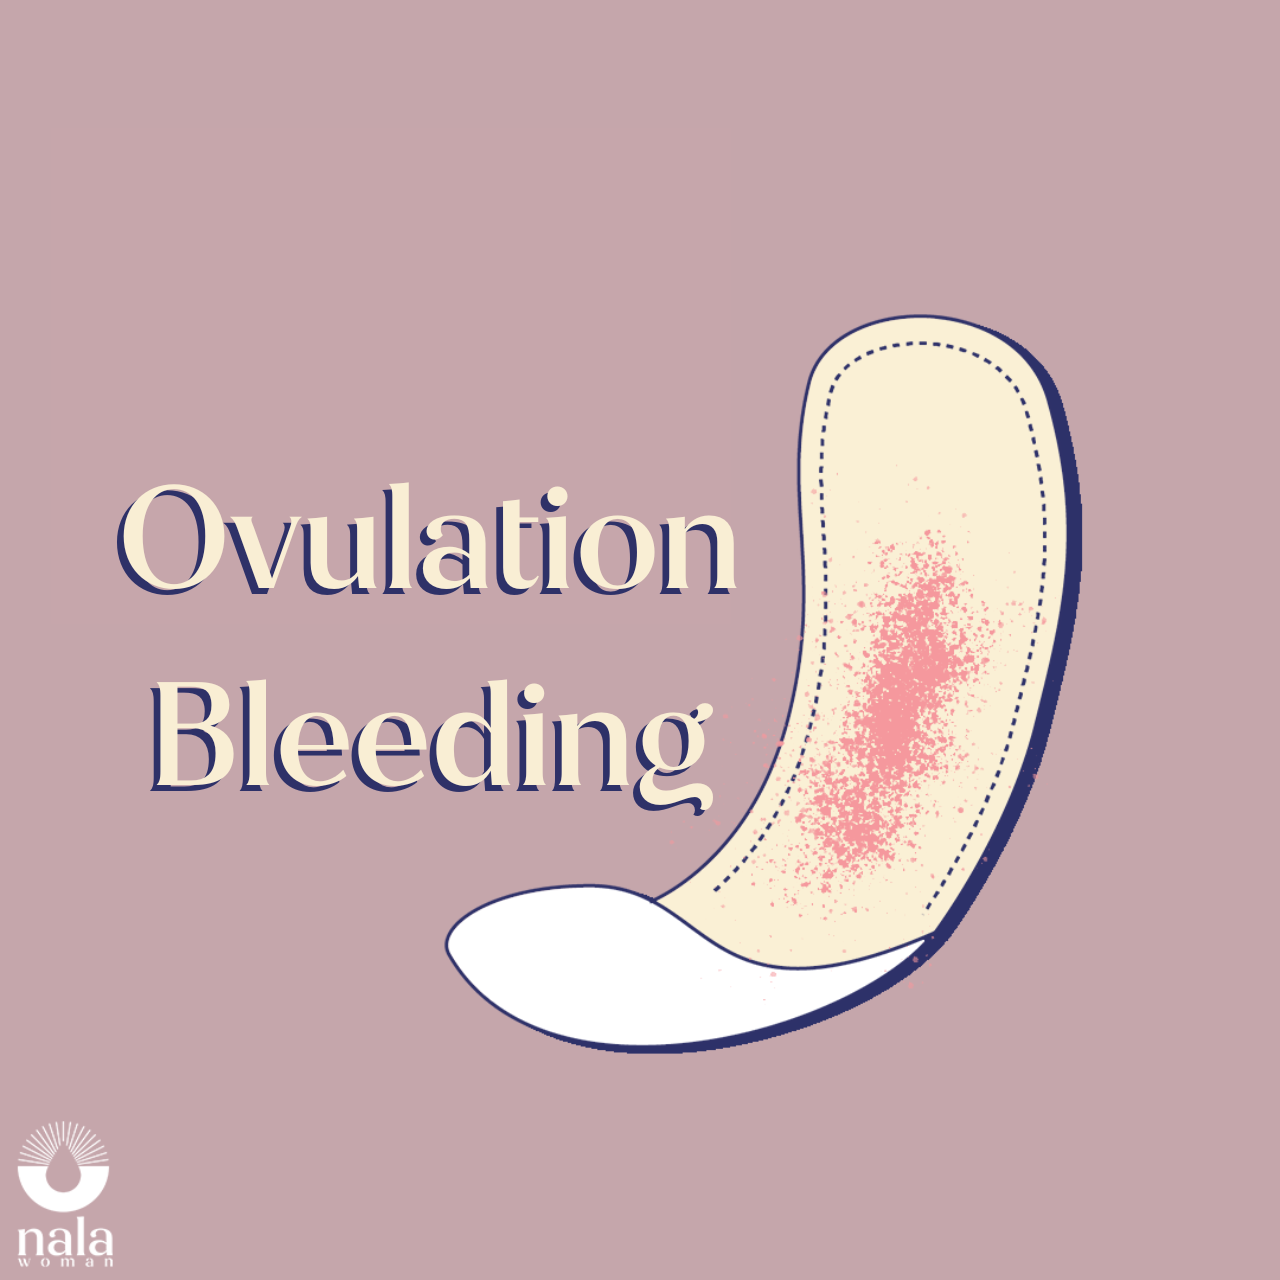 Ovulation Bleeding: What You Need To Know